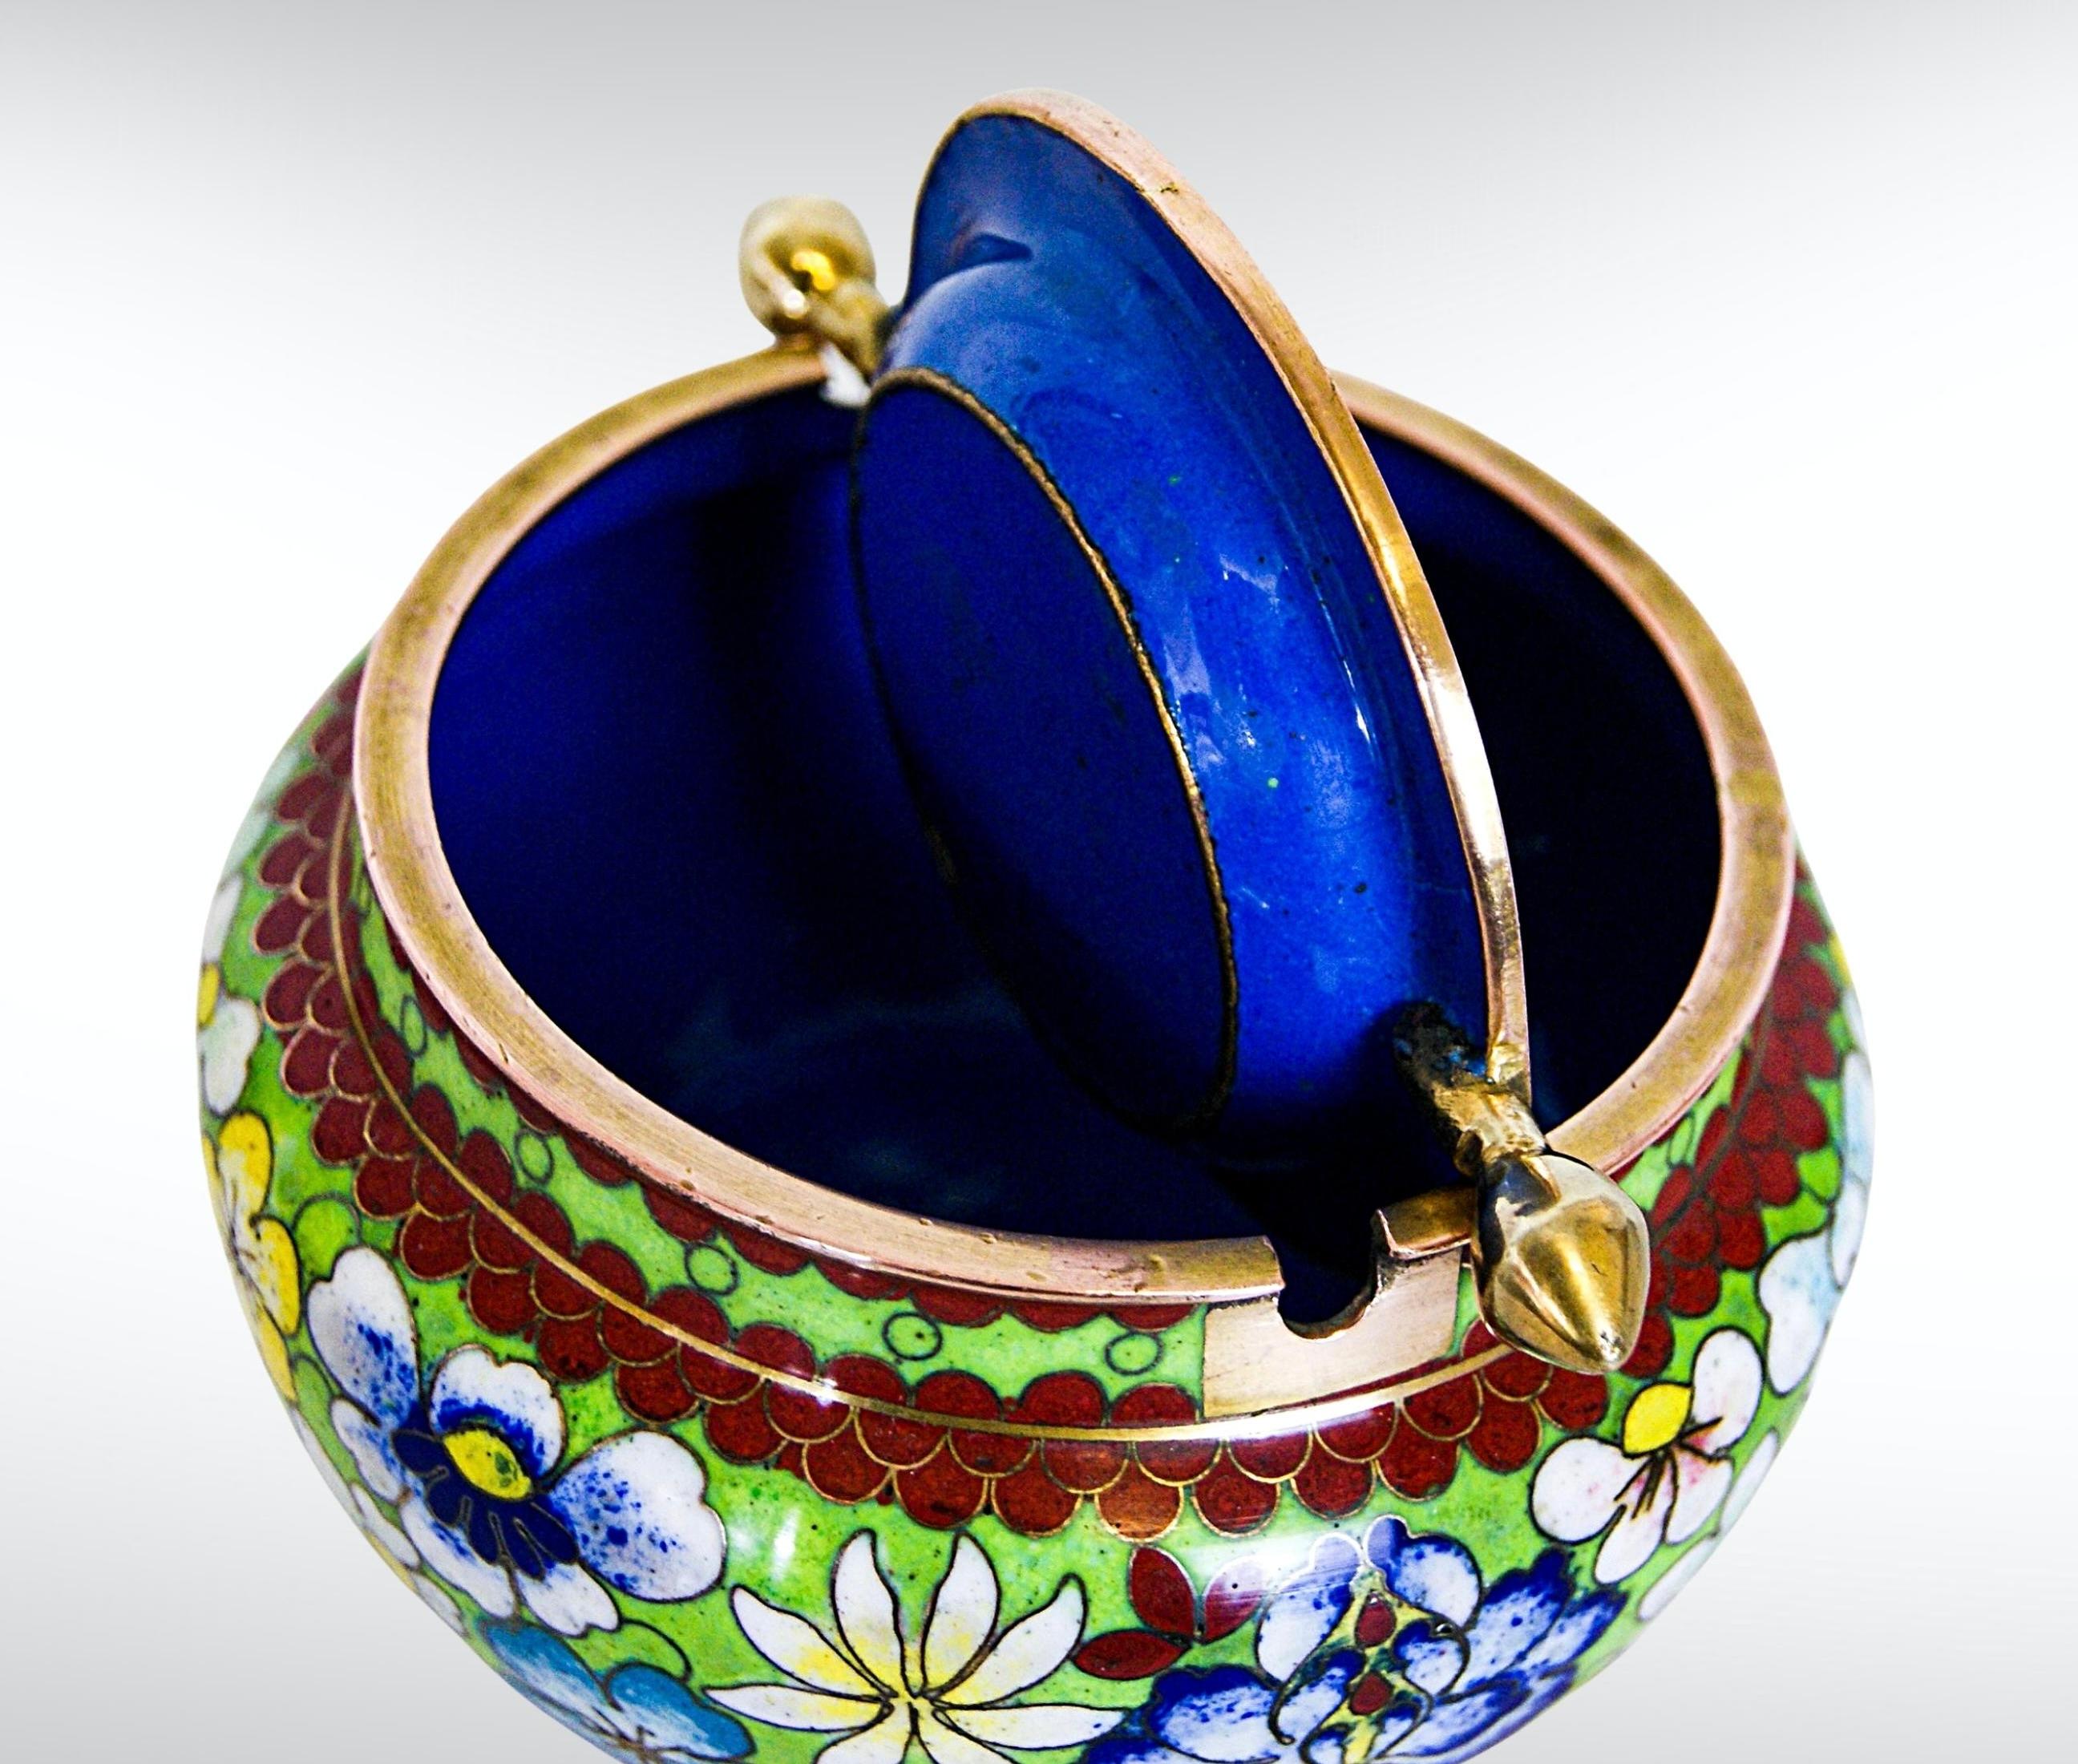 Enameled Vintage Chinoiserie Cloisonné on Brass Enamelled Storage Bowl with Hinged Lid